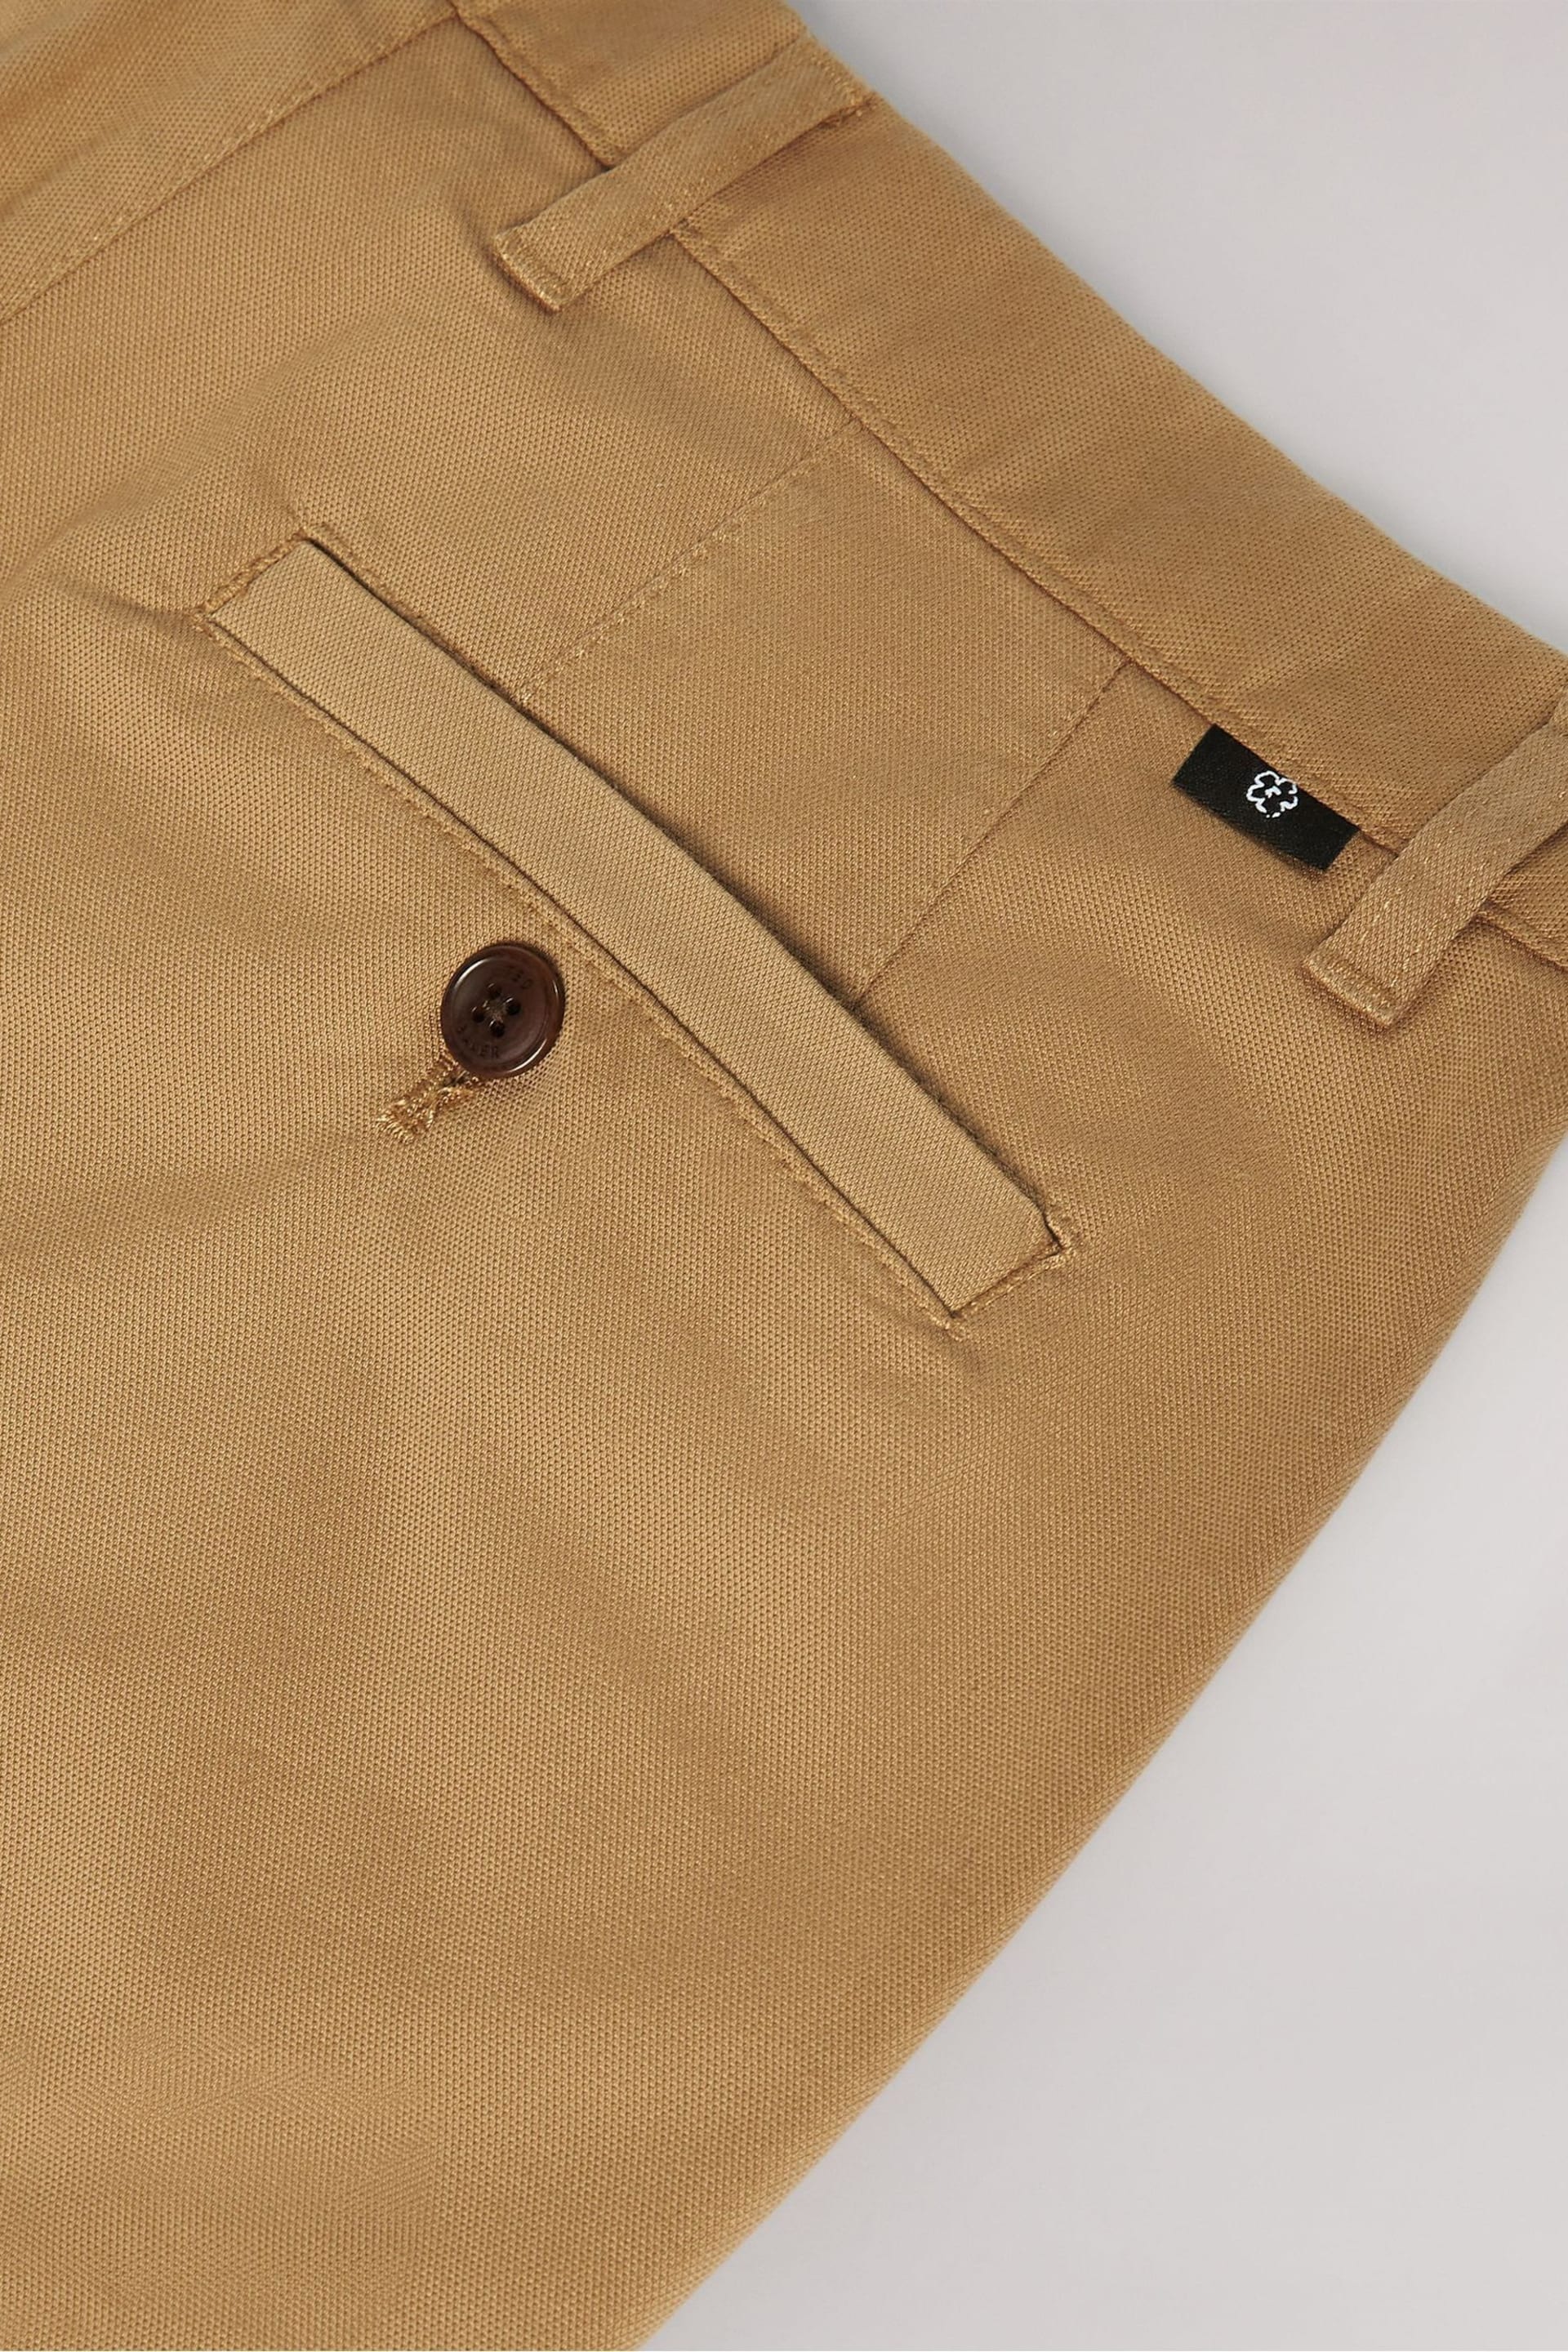 Ted Baker Natural Genbee Casual Relaxed Chinos - Image 5 of 6